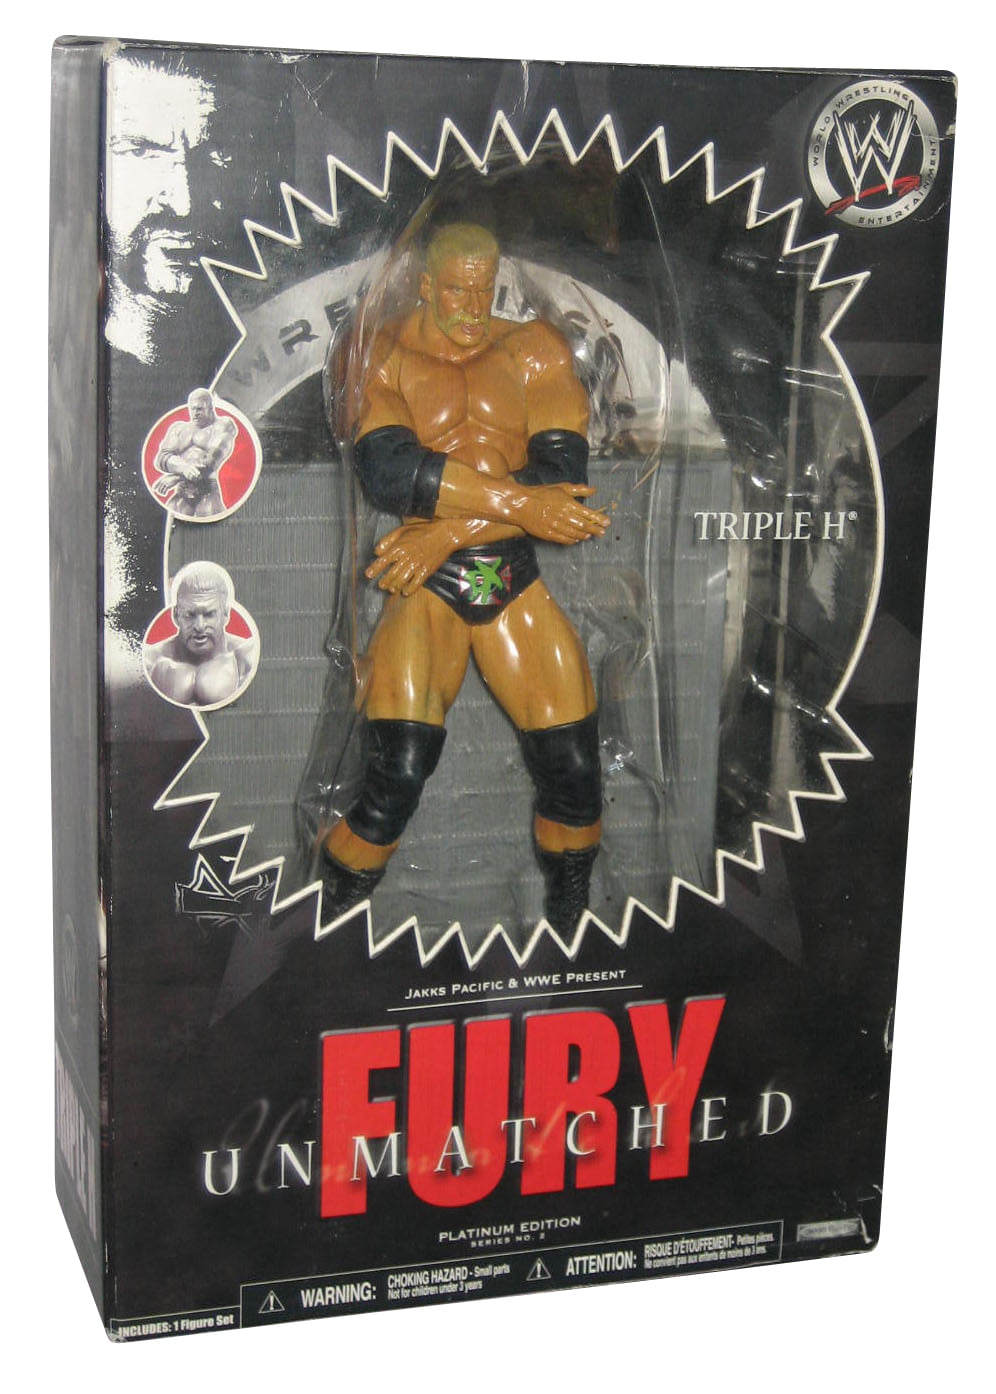 WWE Unmatched Fury Action Figure Ric Flair 2007 Jakks Pacific Series 4 for sale online 